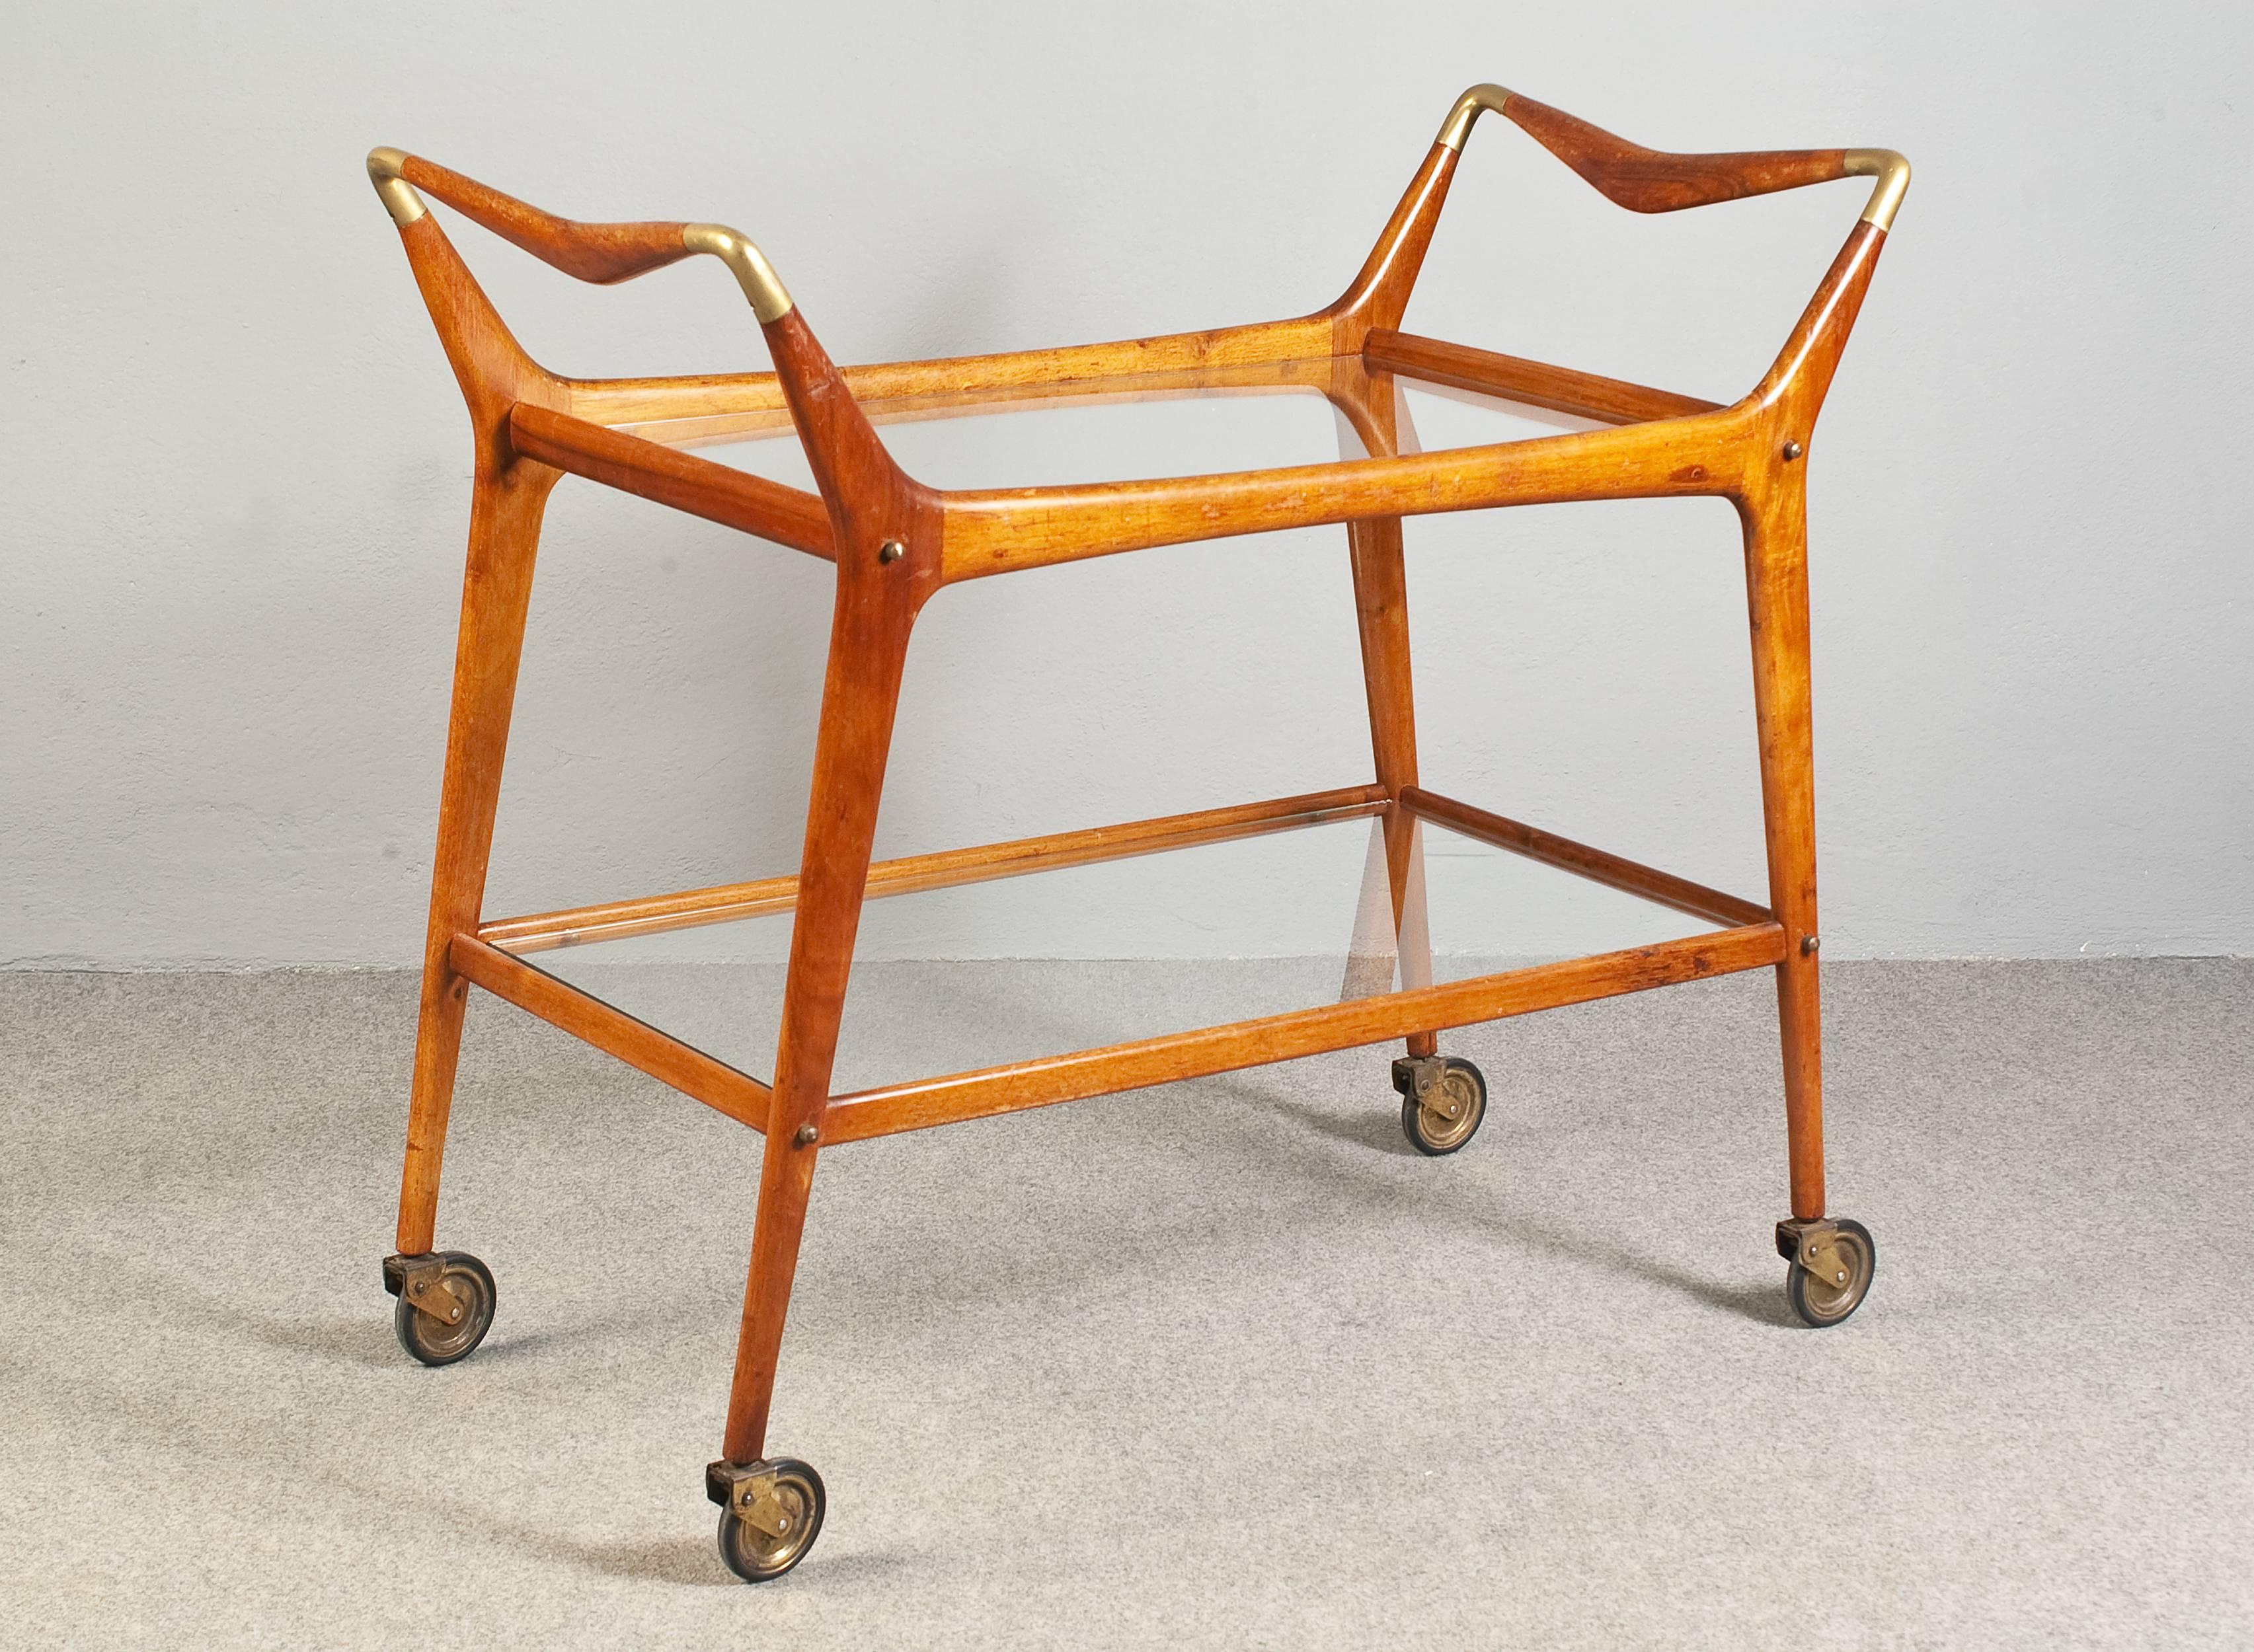 Wood and glass bar cart designed by Ico Parisi for De Baggis.